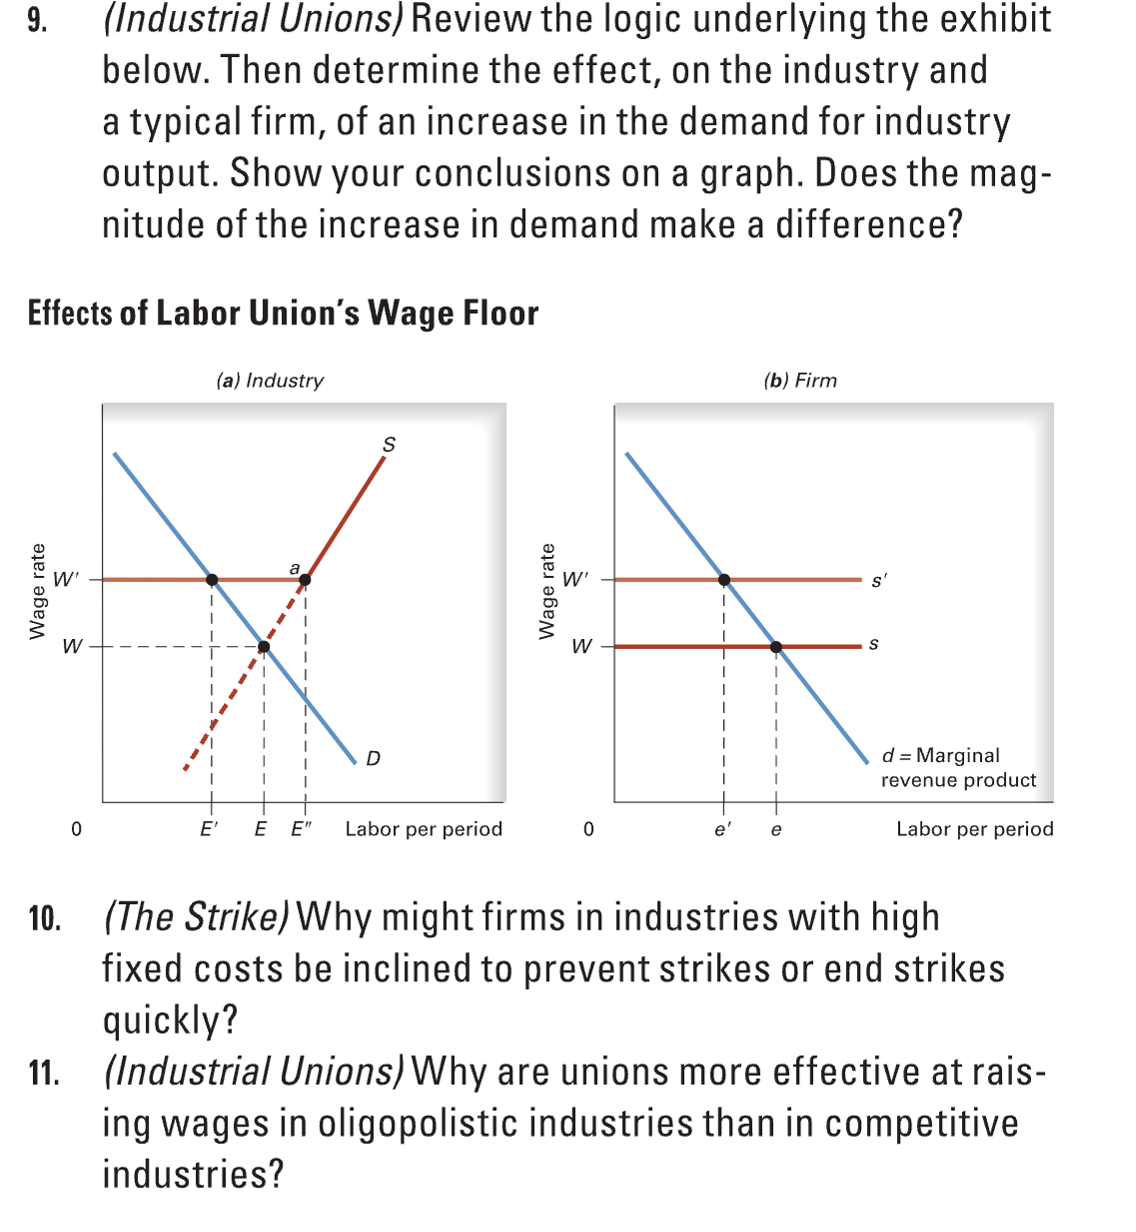 11. (Industrial Unions)Why are unions more effective at rais-
ing wages in oligopolistic industries than in competitive
industries?
